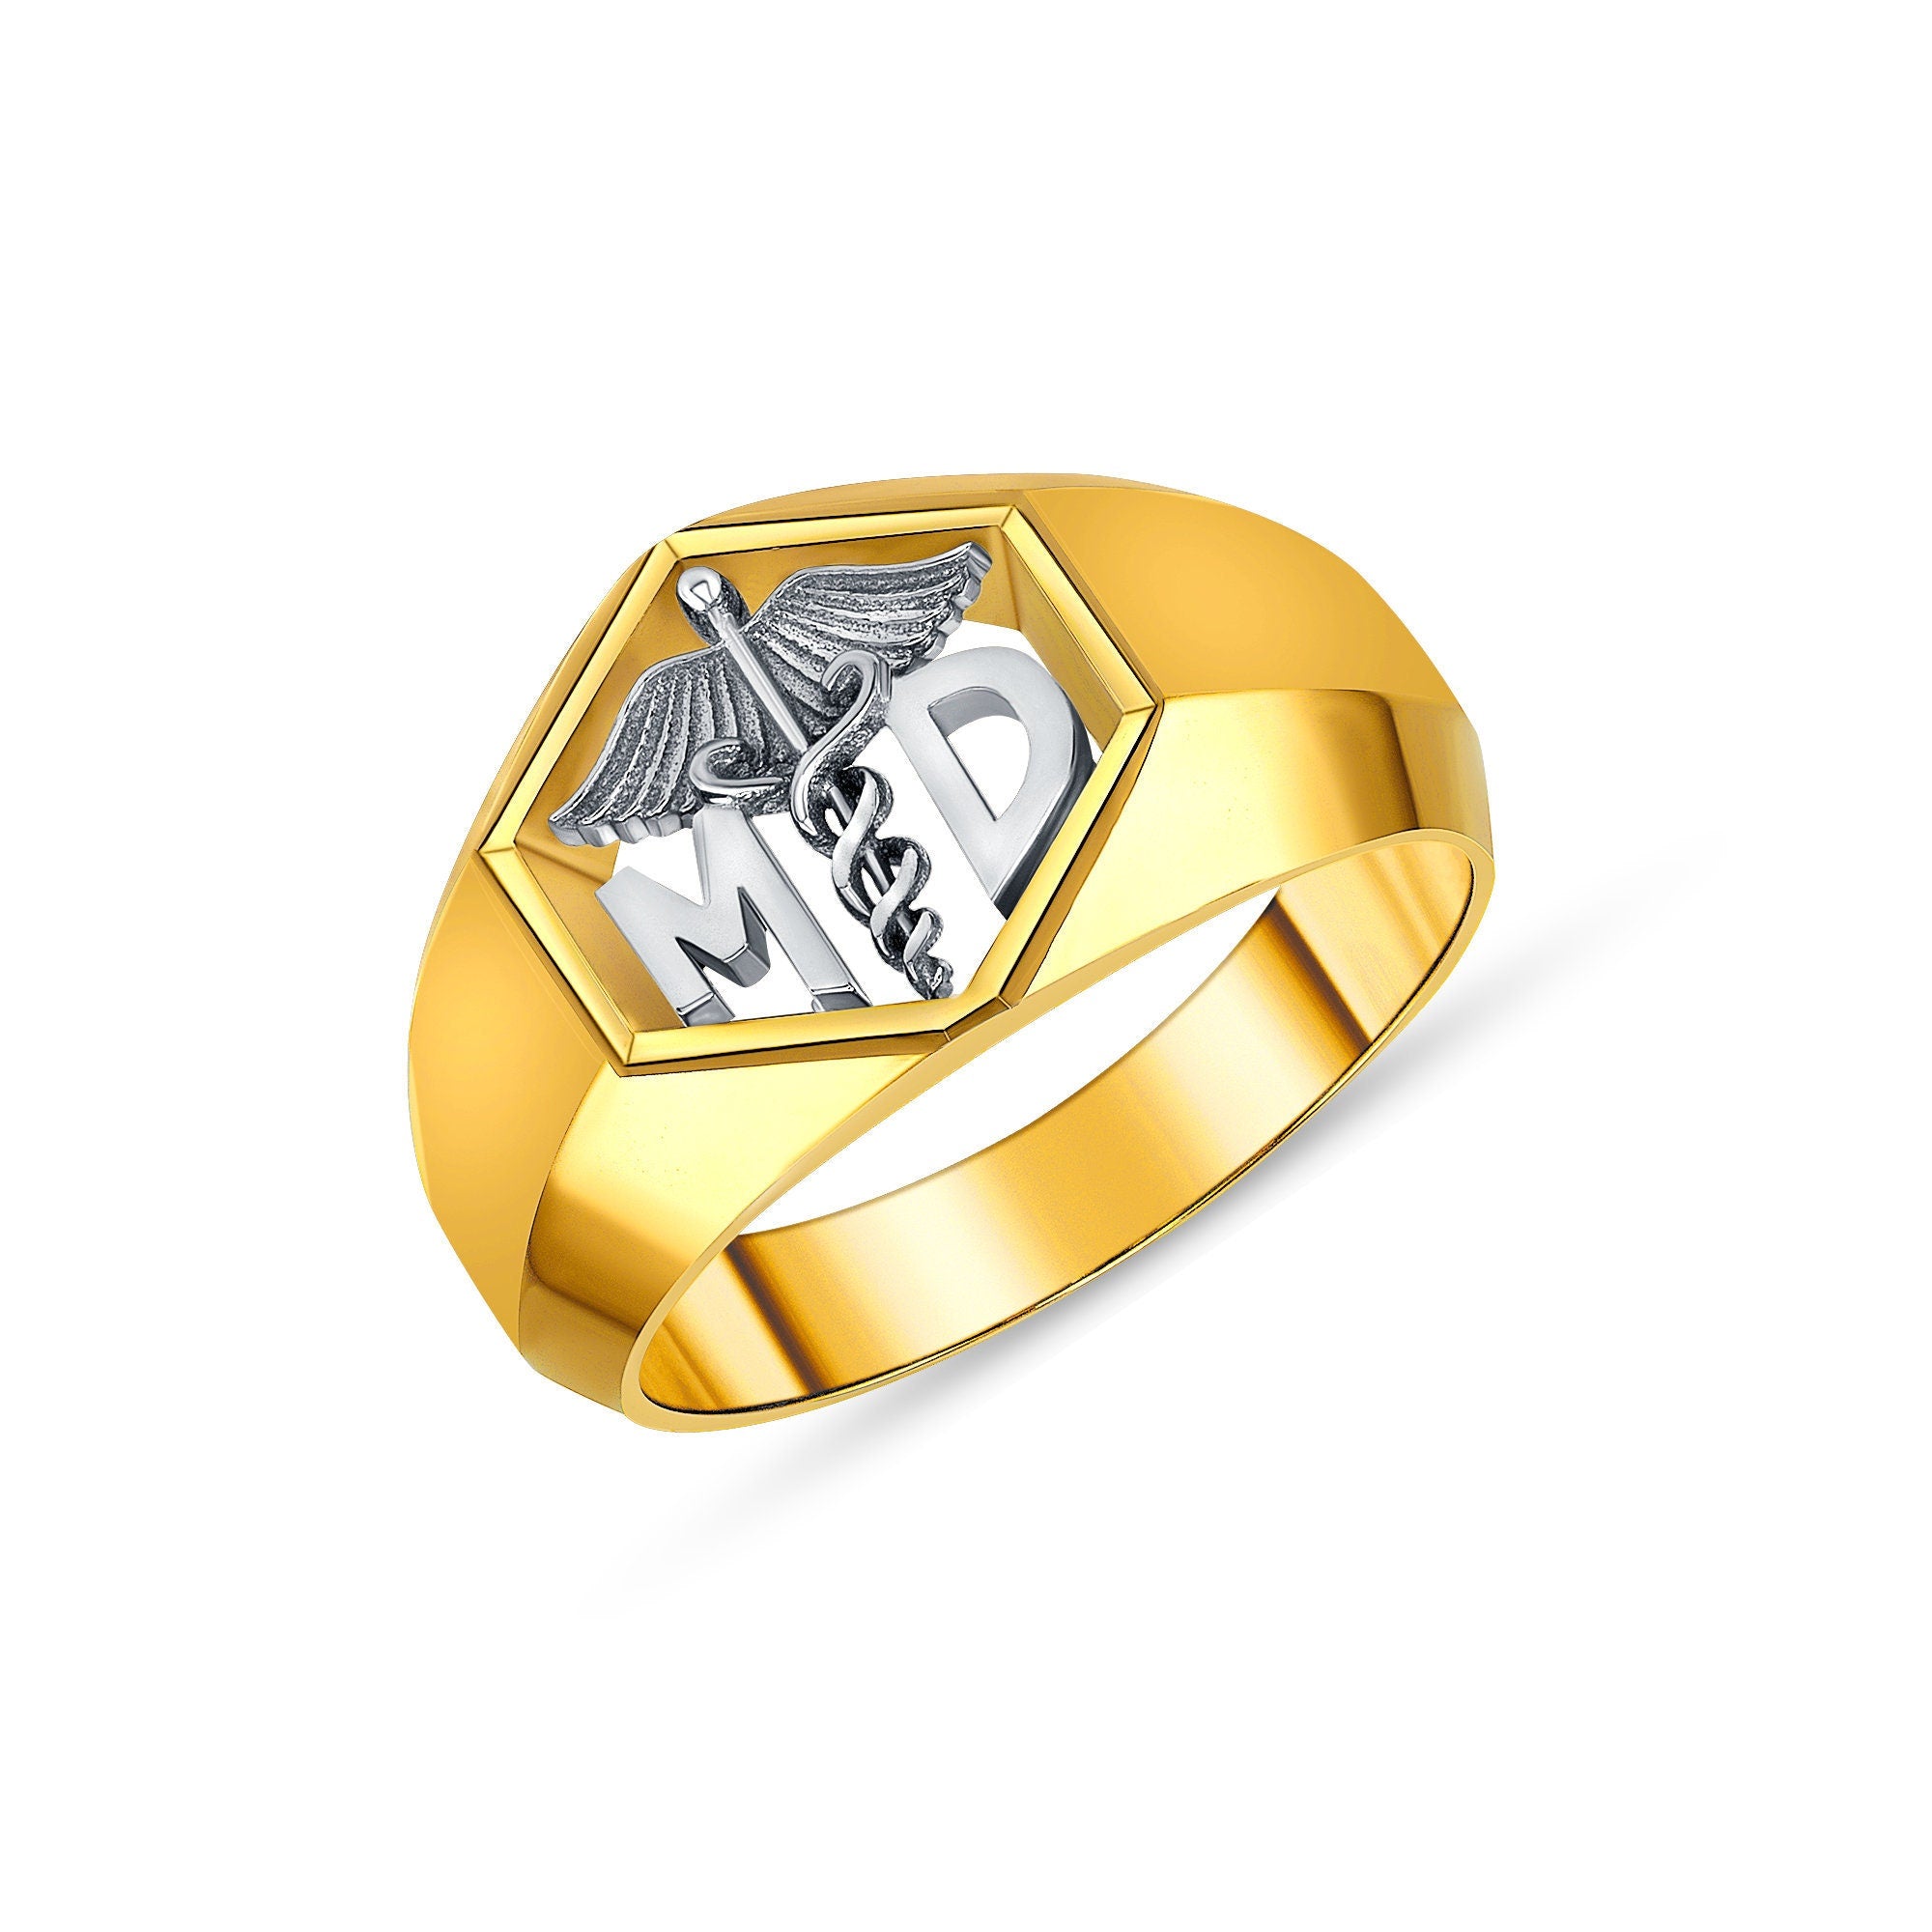 14k solid yellow and white gold Men's MD ring